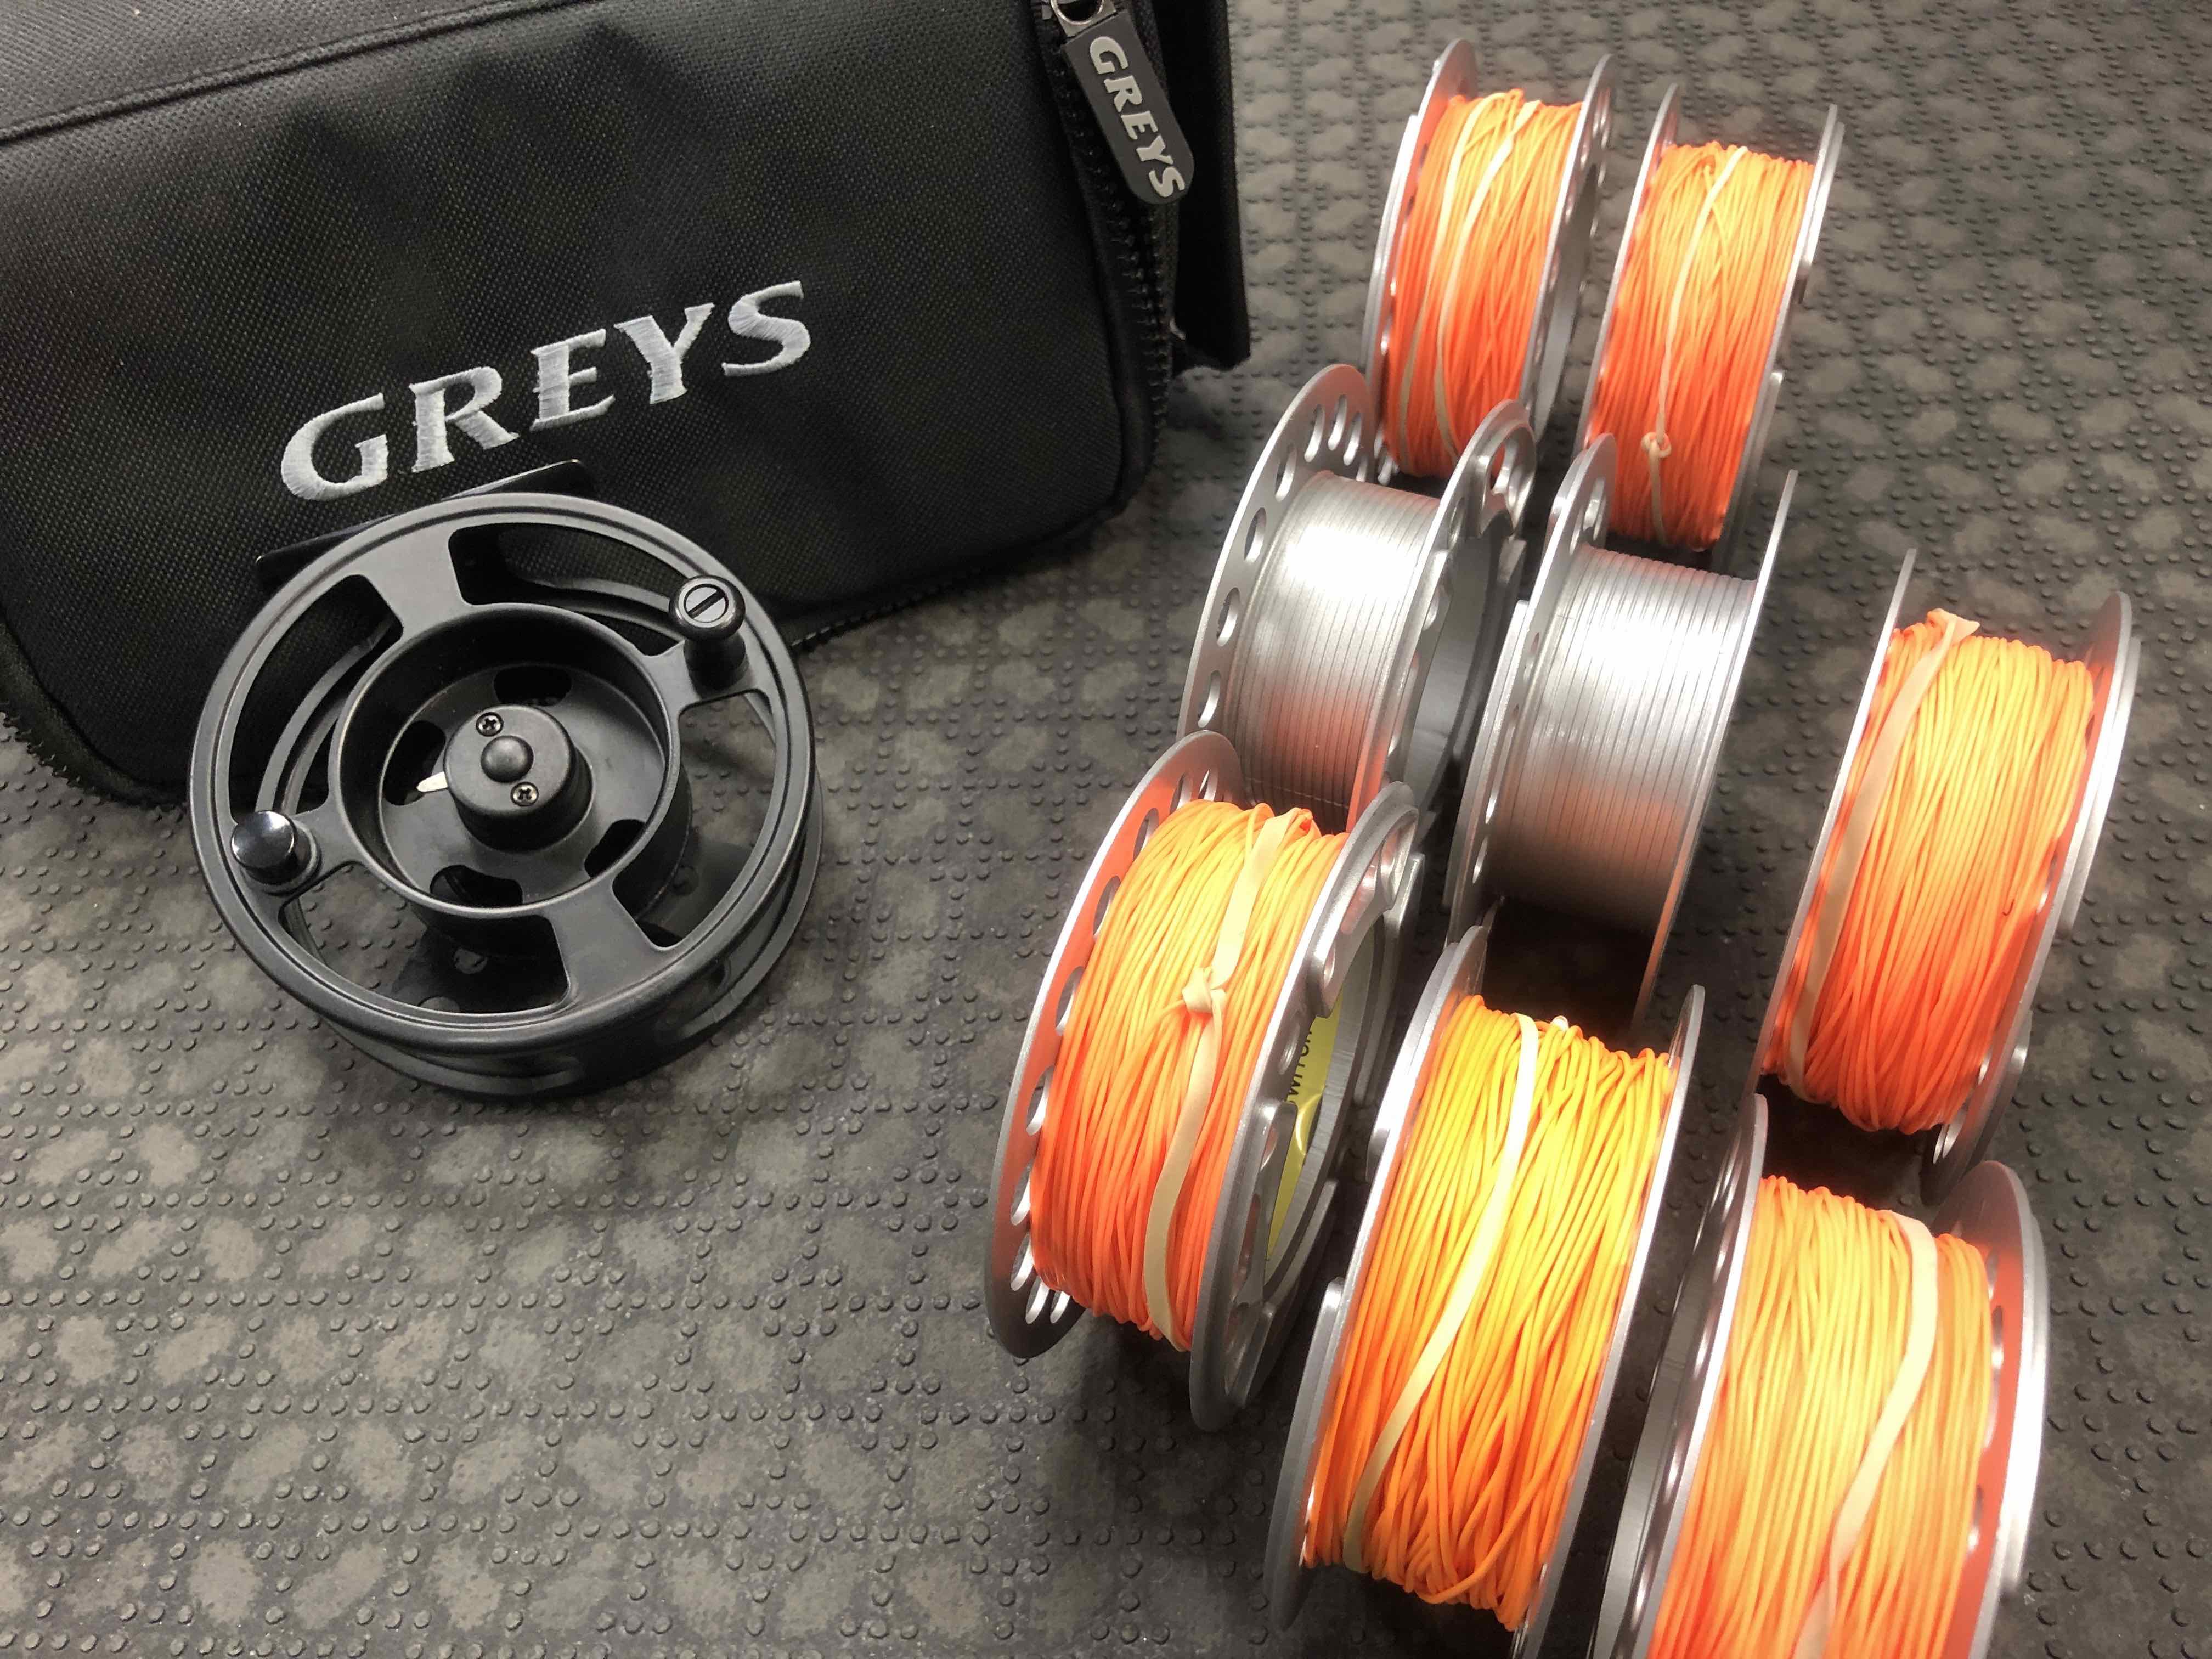 https://thefirstcast.ca/wp-content/uploads/2019/07/Greys-GRXi-78-Fly-Reel-with-8-Spare-Spools-CC.jpg